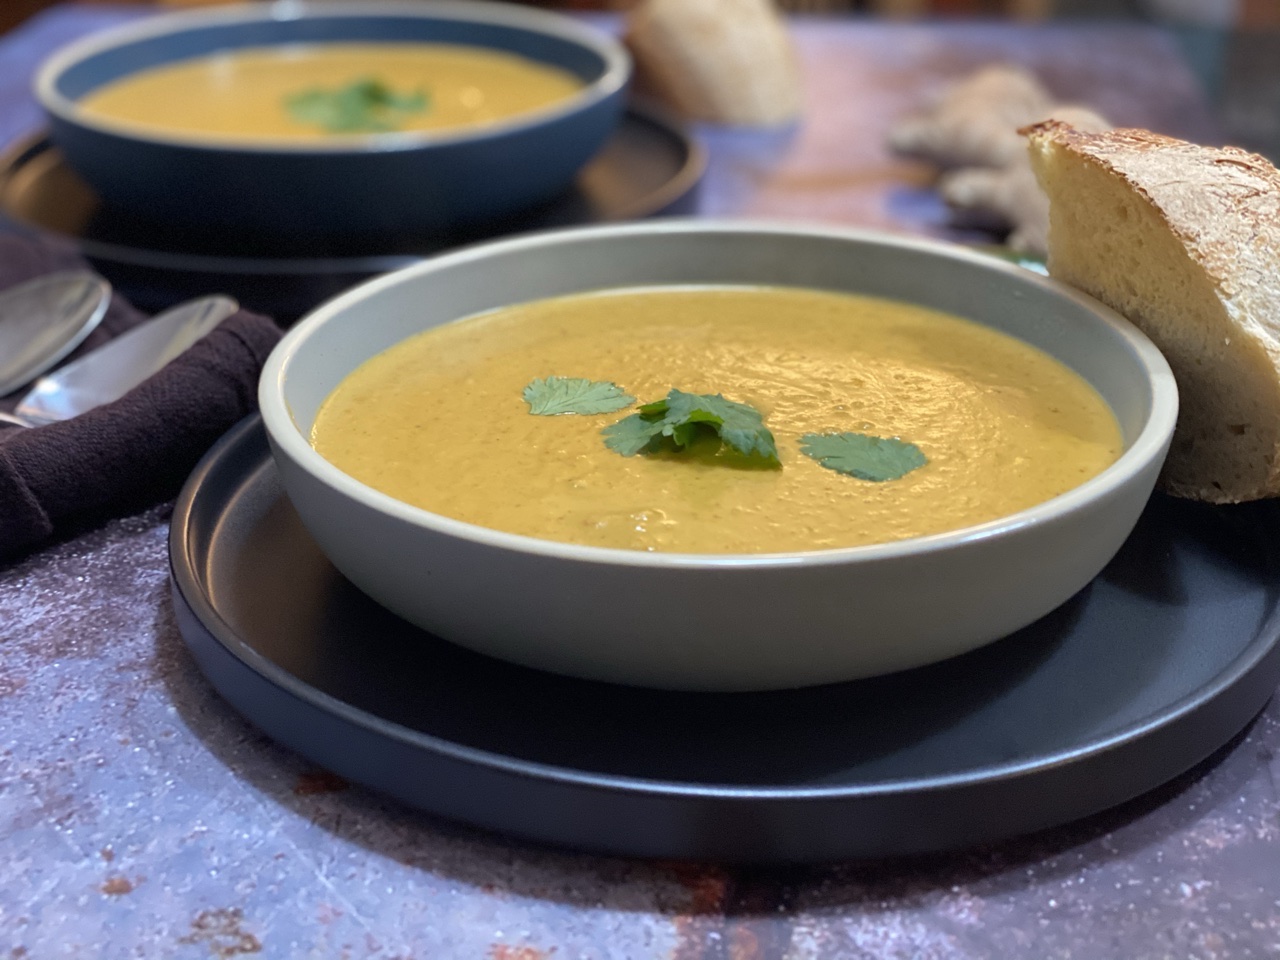 1E9D3519 91B2 4742 8F35 5AB88BB71FDE - Roasted Butternut Squash Soup with Yellow Curry